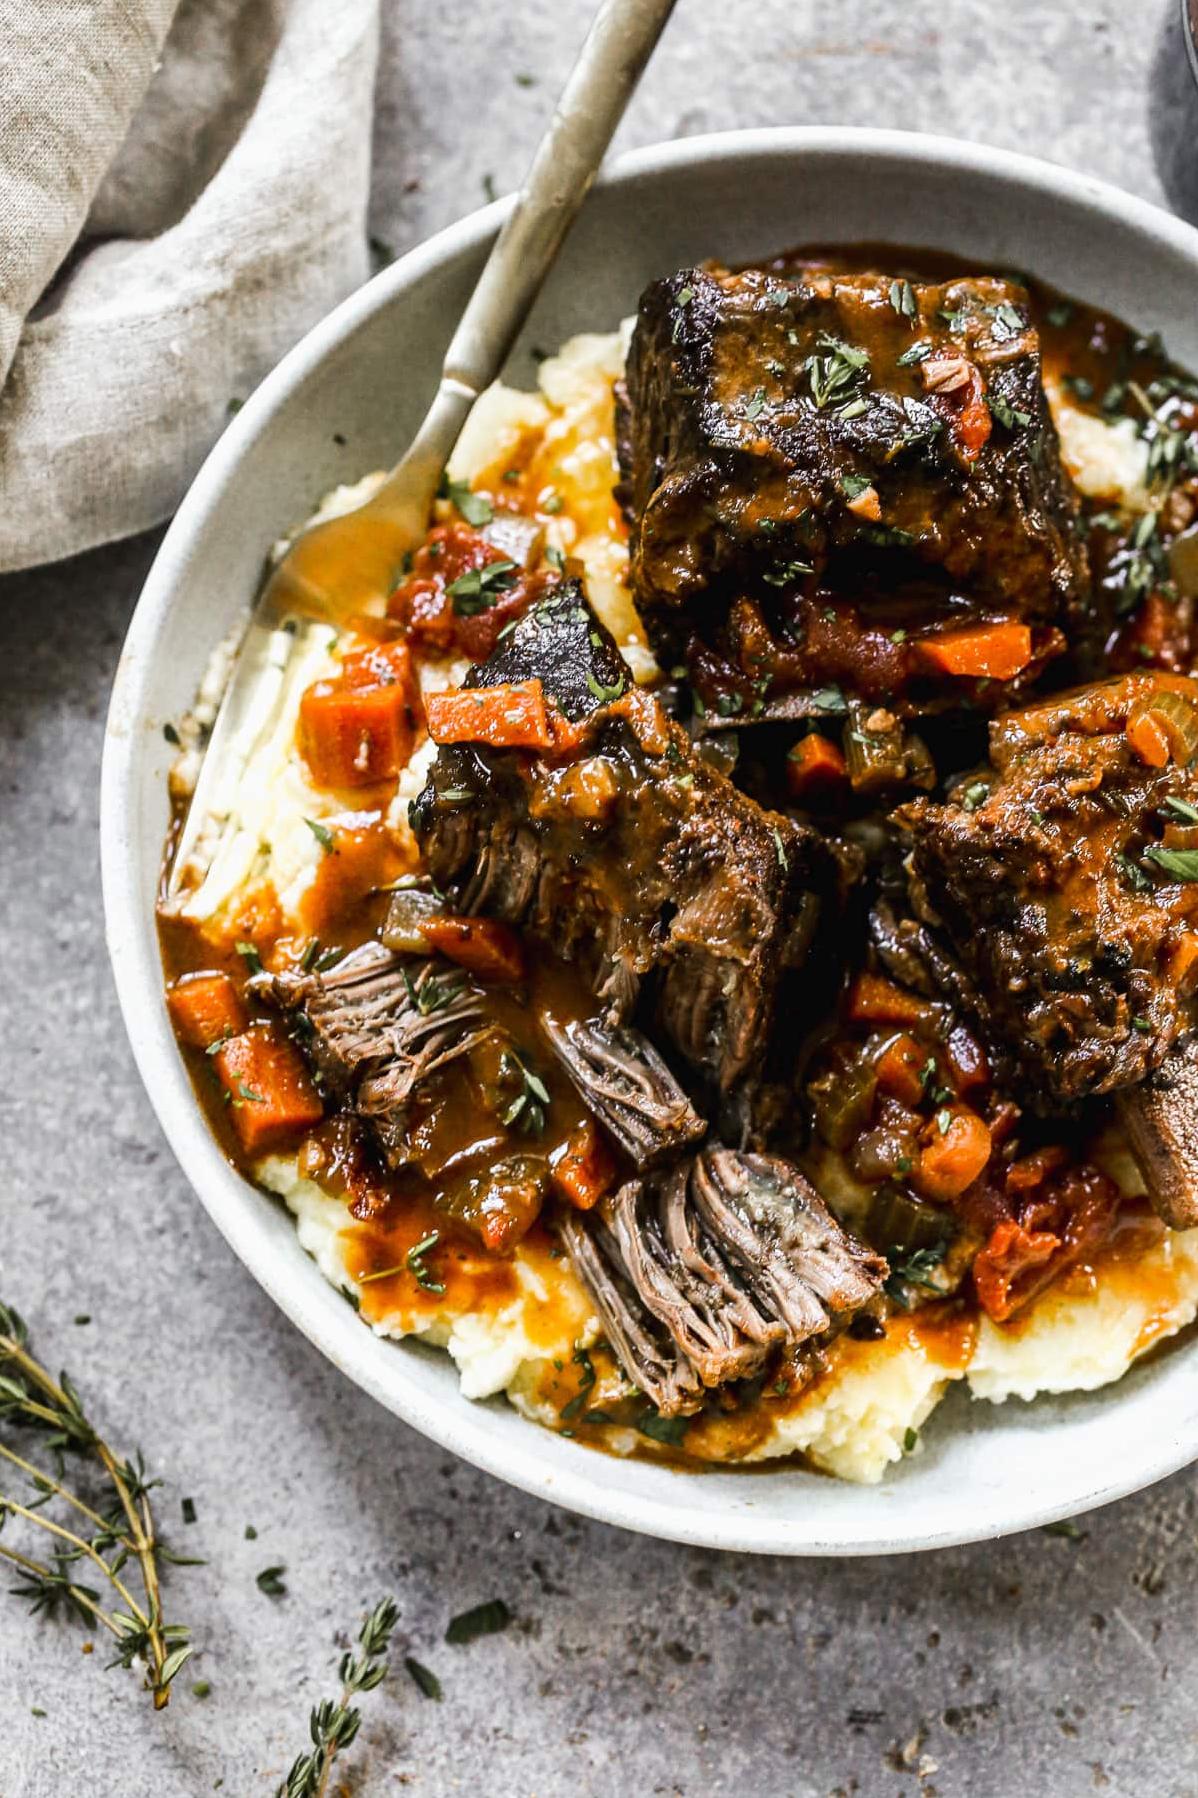  Get fancy with this classy Braised Short Ribs in Red Wine recipe